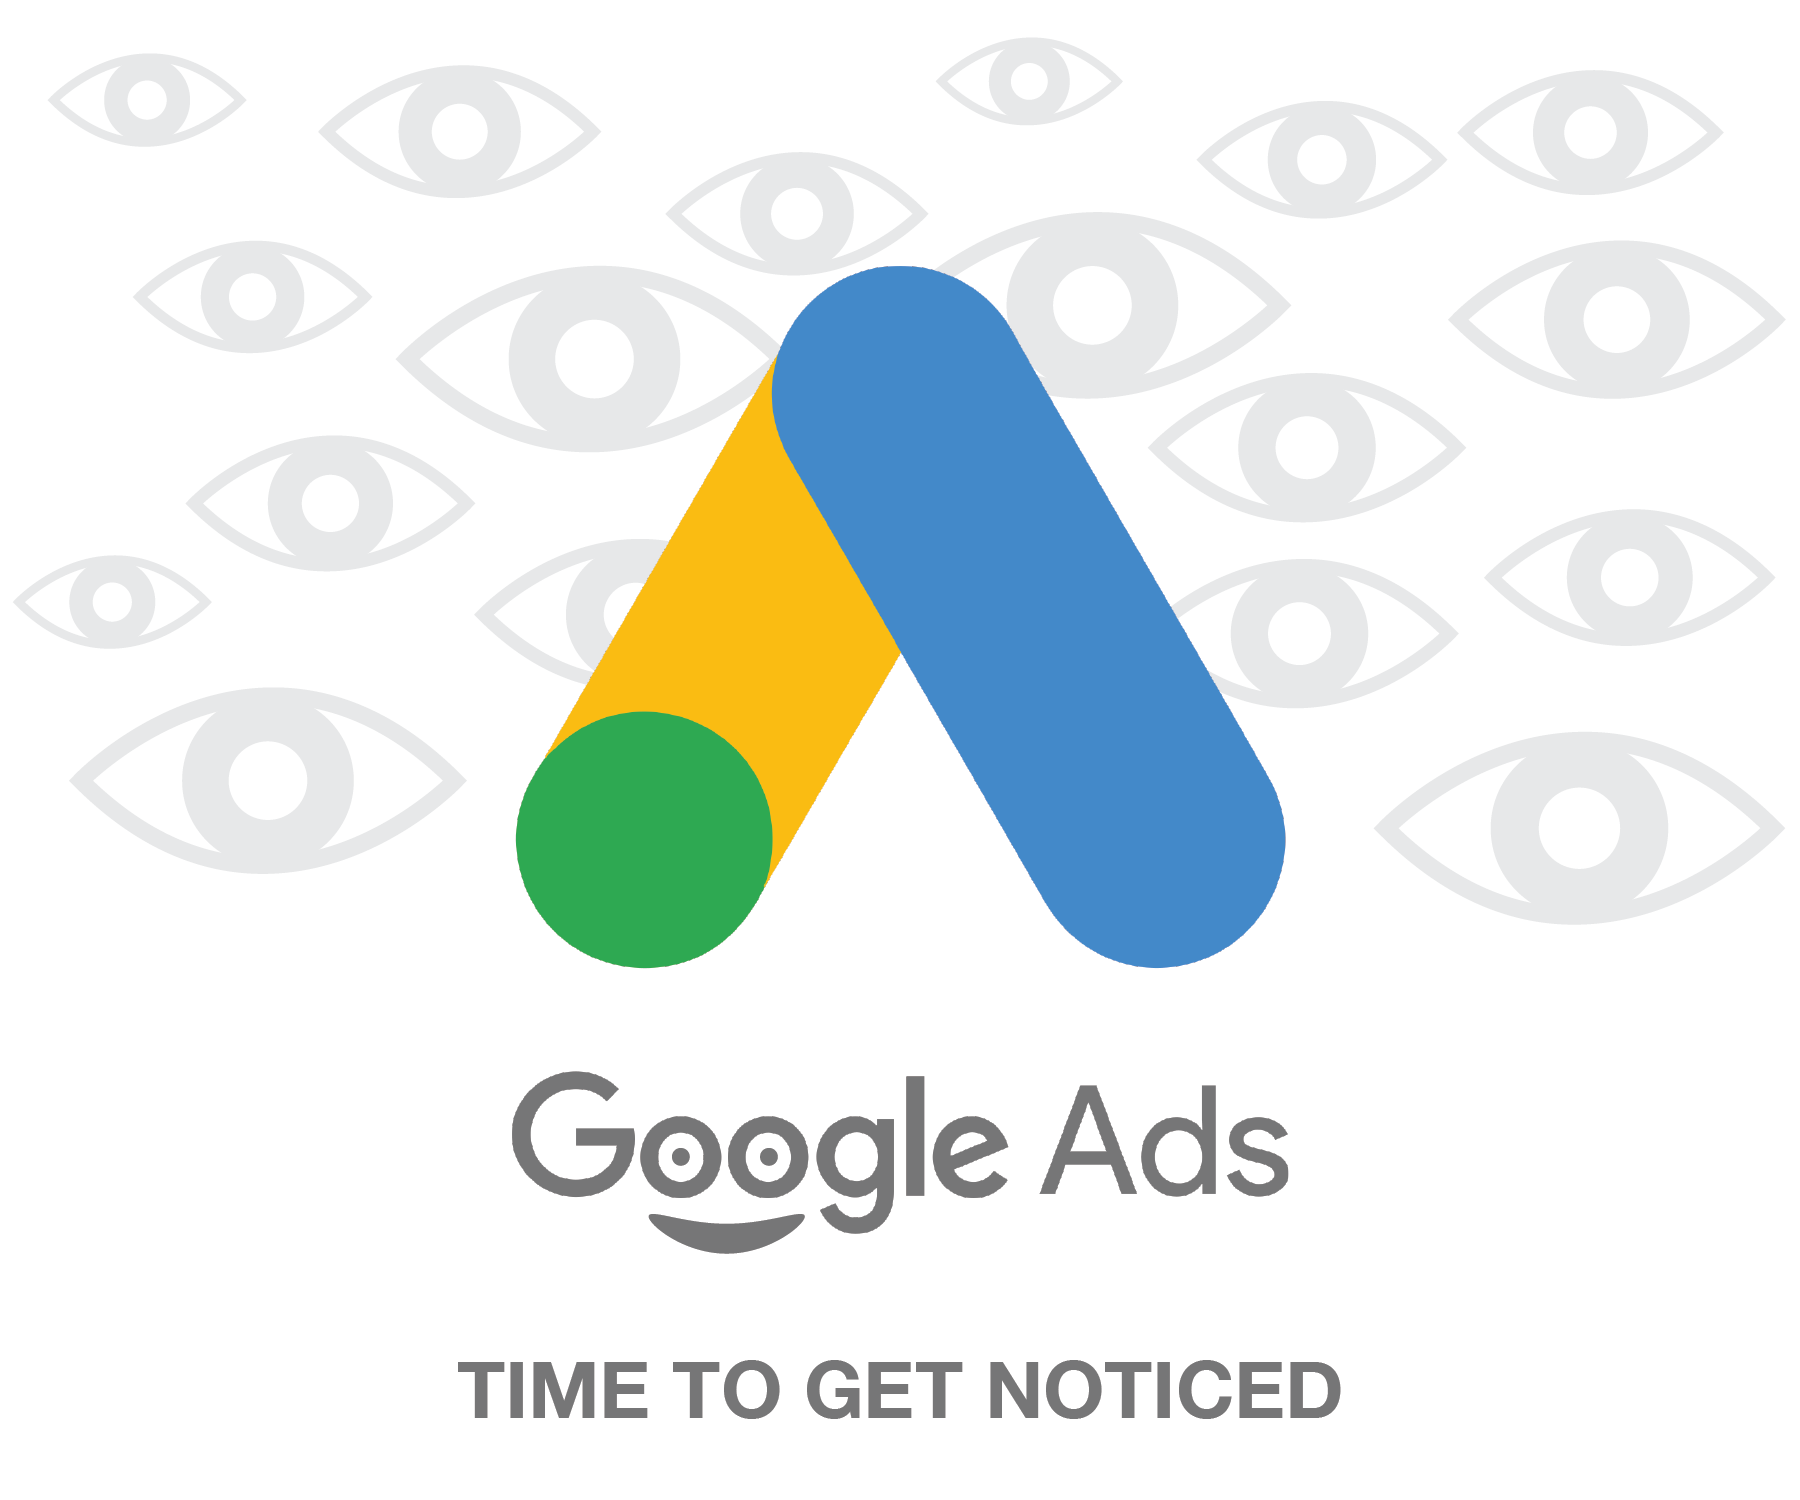 Paid ads is all eyes one me. Let us get you more views with the help of Ahmor Marketing.